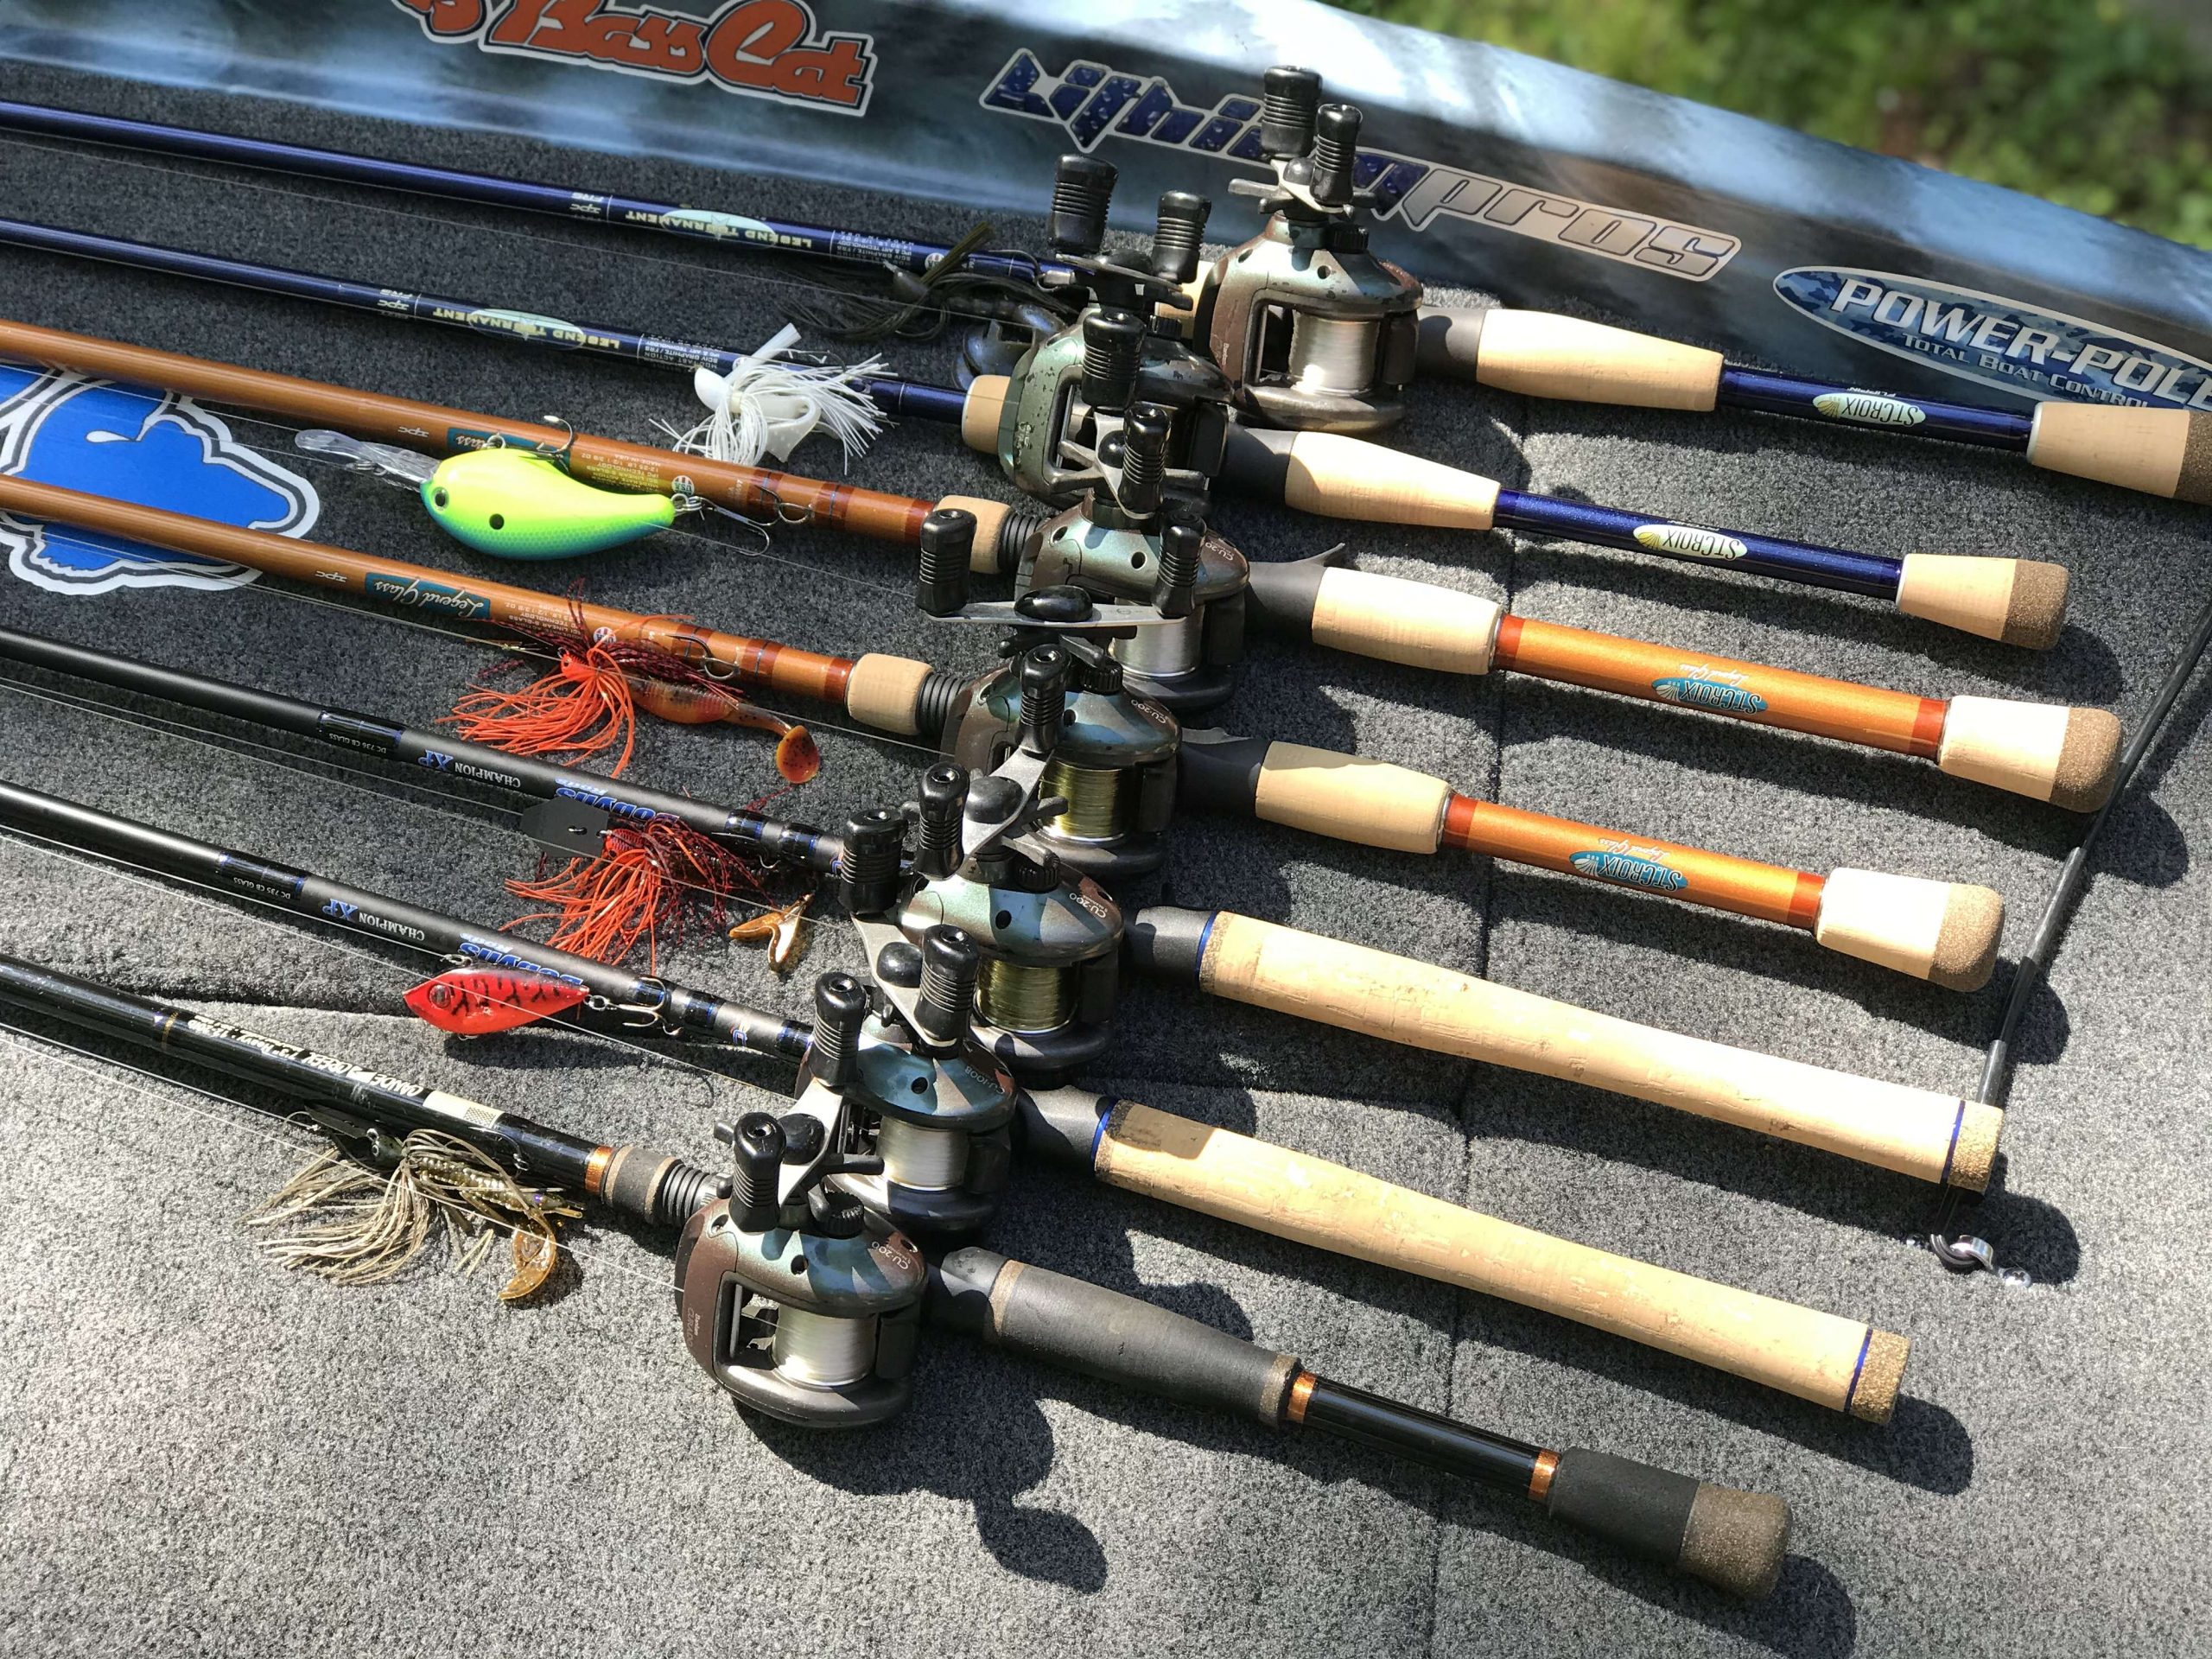 He picked up some new fiberglass rods at the 2020 Bassmaster Classic that he has had time to rig.